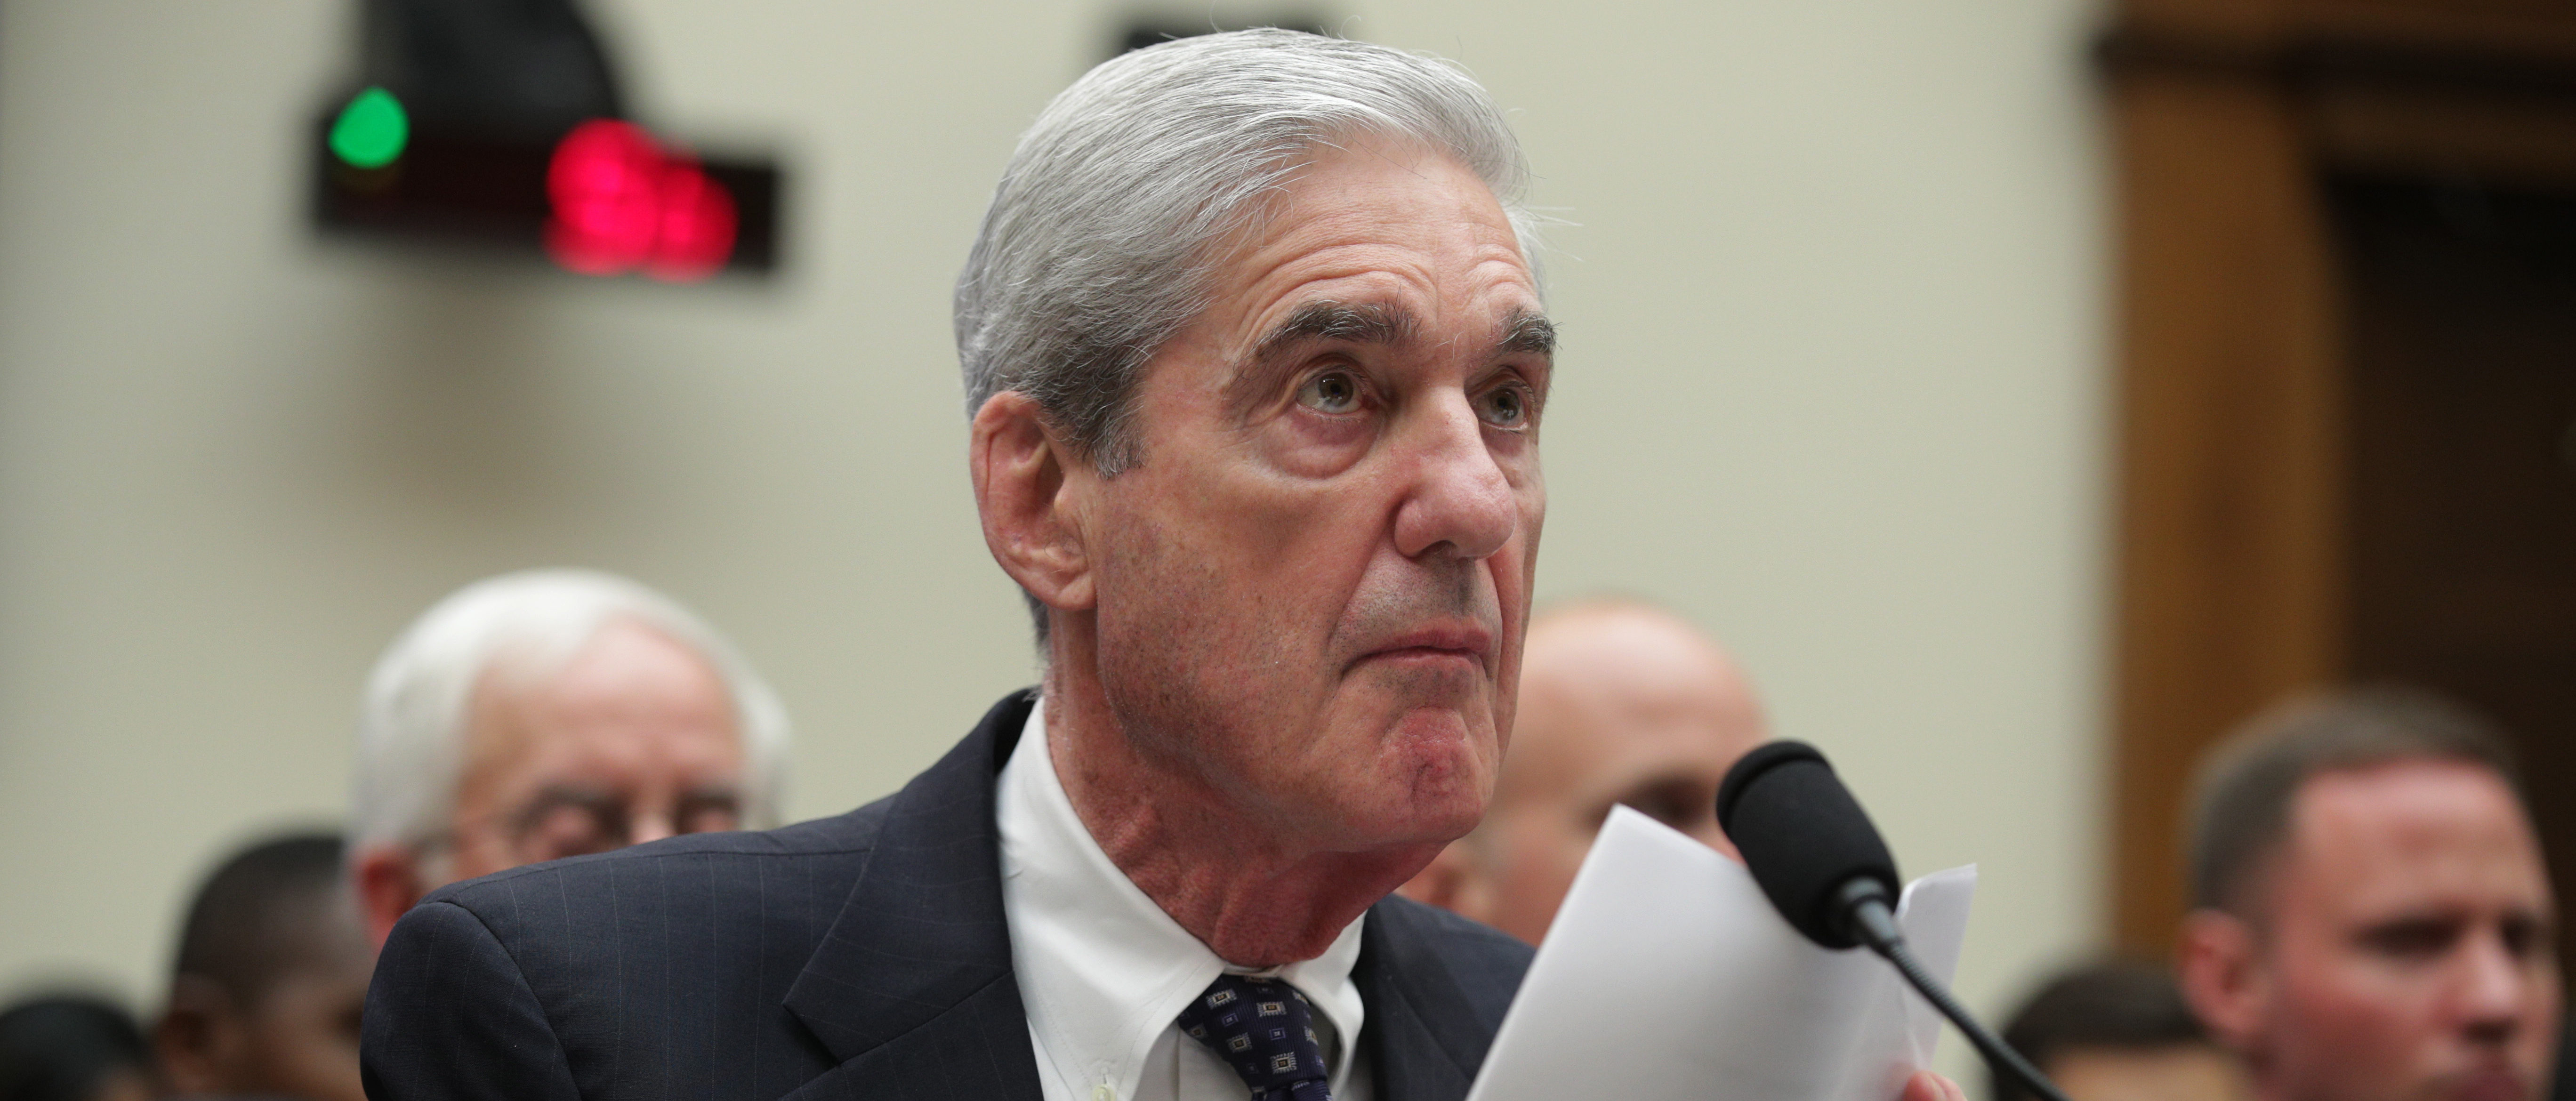 Former special counsel Robert Mueller testifies before the House Intelligence Committee about his report on Russian interference in the 2016 presidential election in the Rayburn House Office Building July 24, 2019 in Washington, D.C. (Alex Wong/Getty Images)